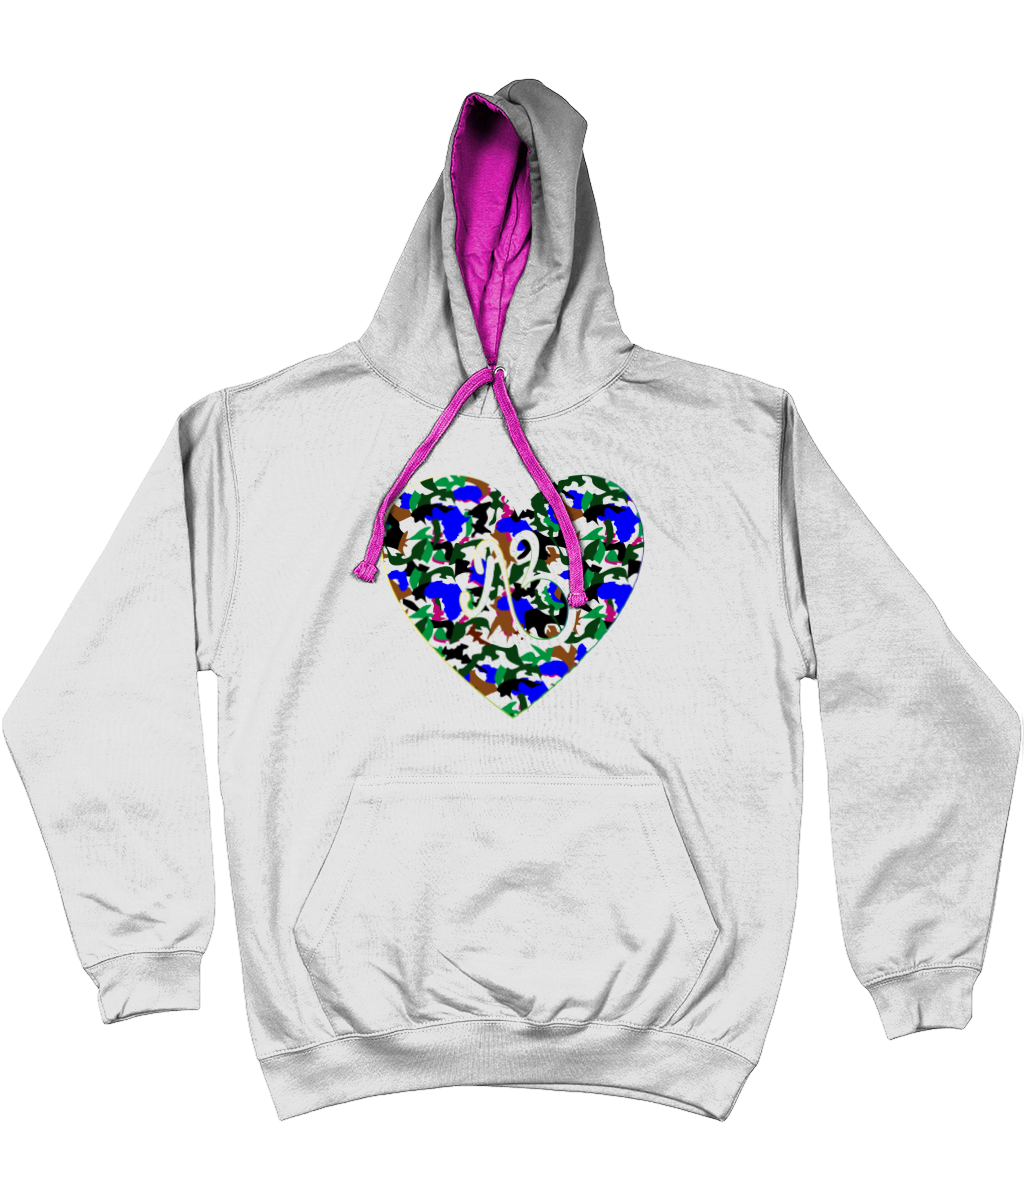 AfriBix Camo Heart Unisex Hoodie with a contrast hood and string